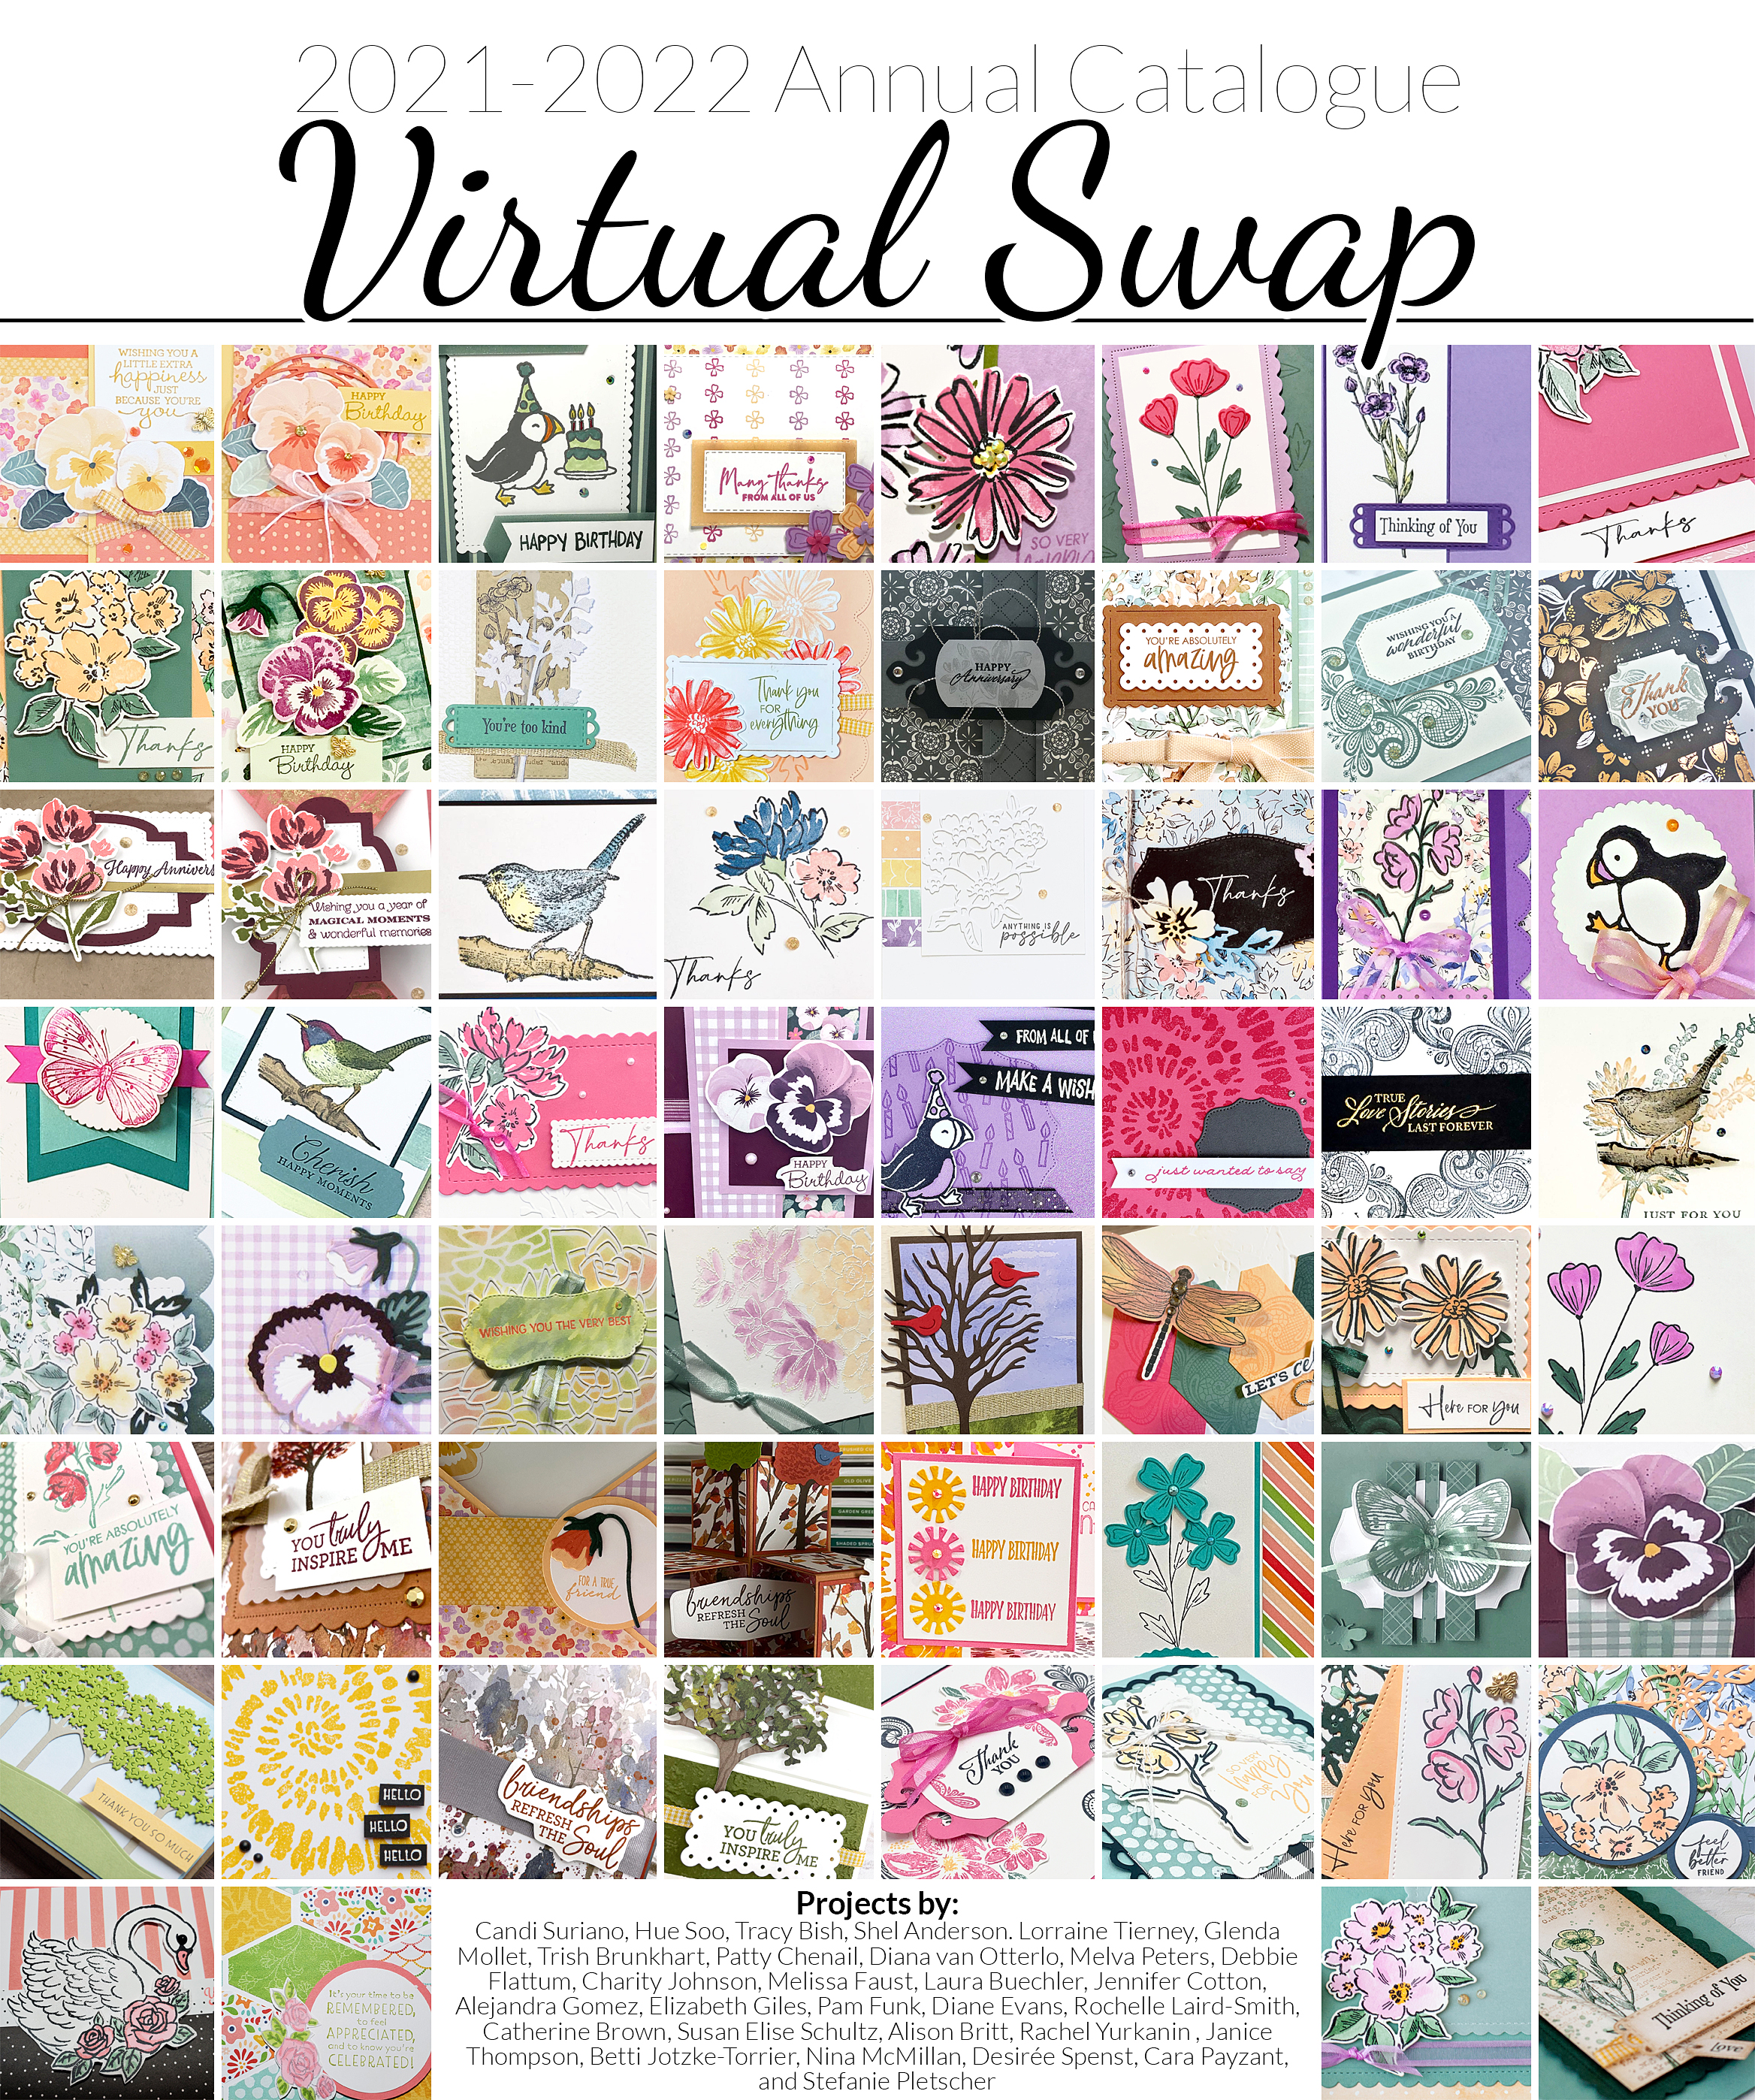 "Crafty Collaborations, Candi Suriano, Stampin' Up!"